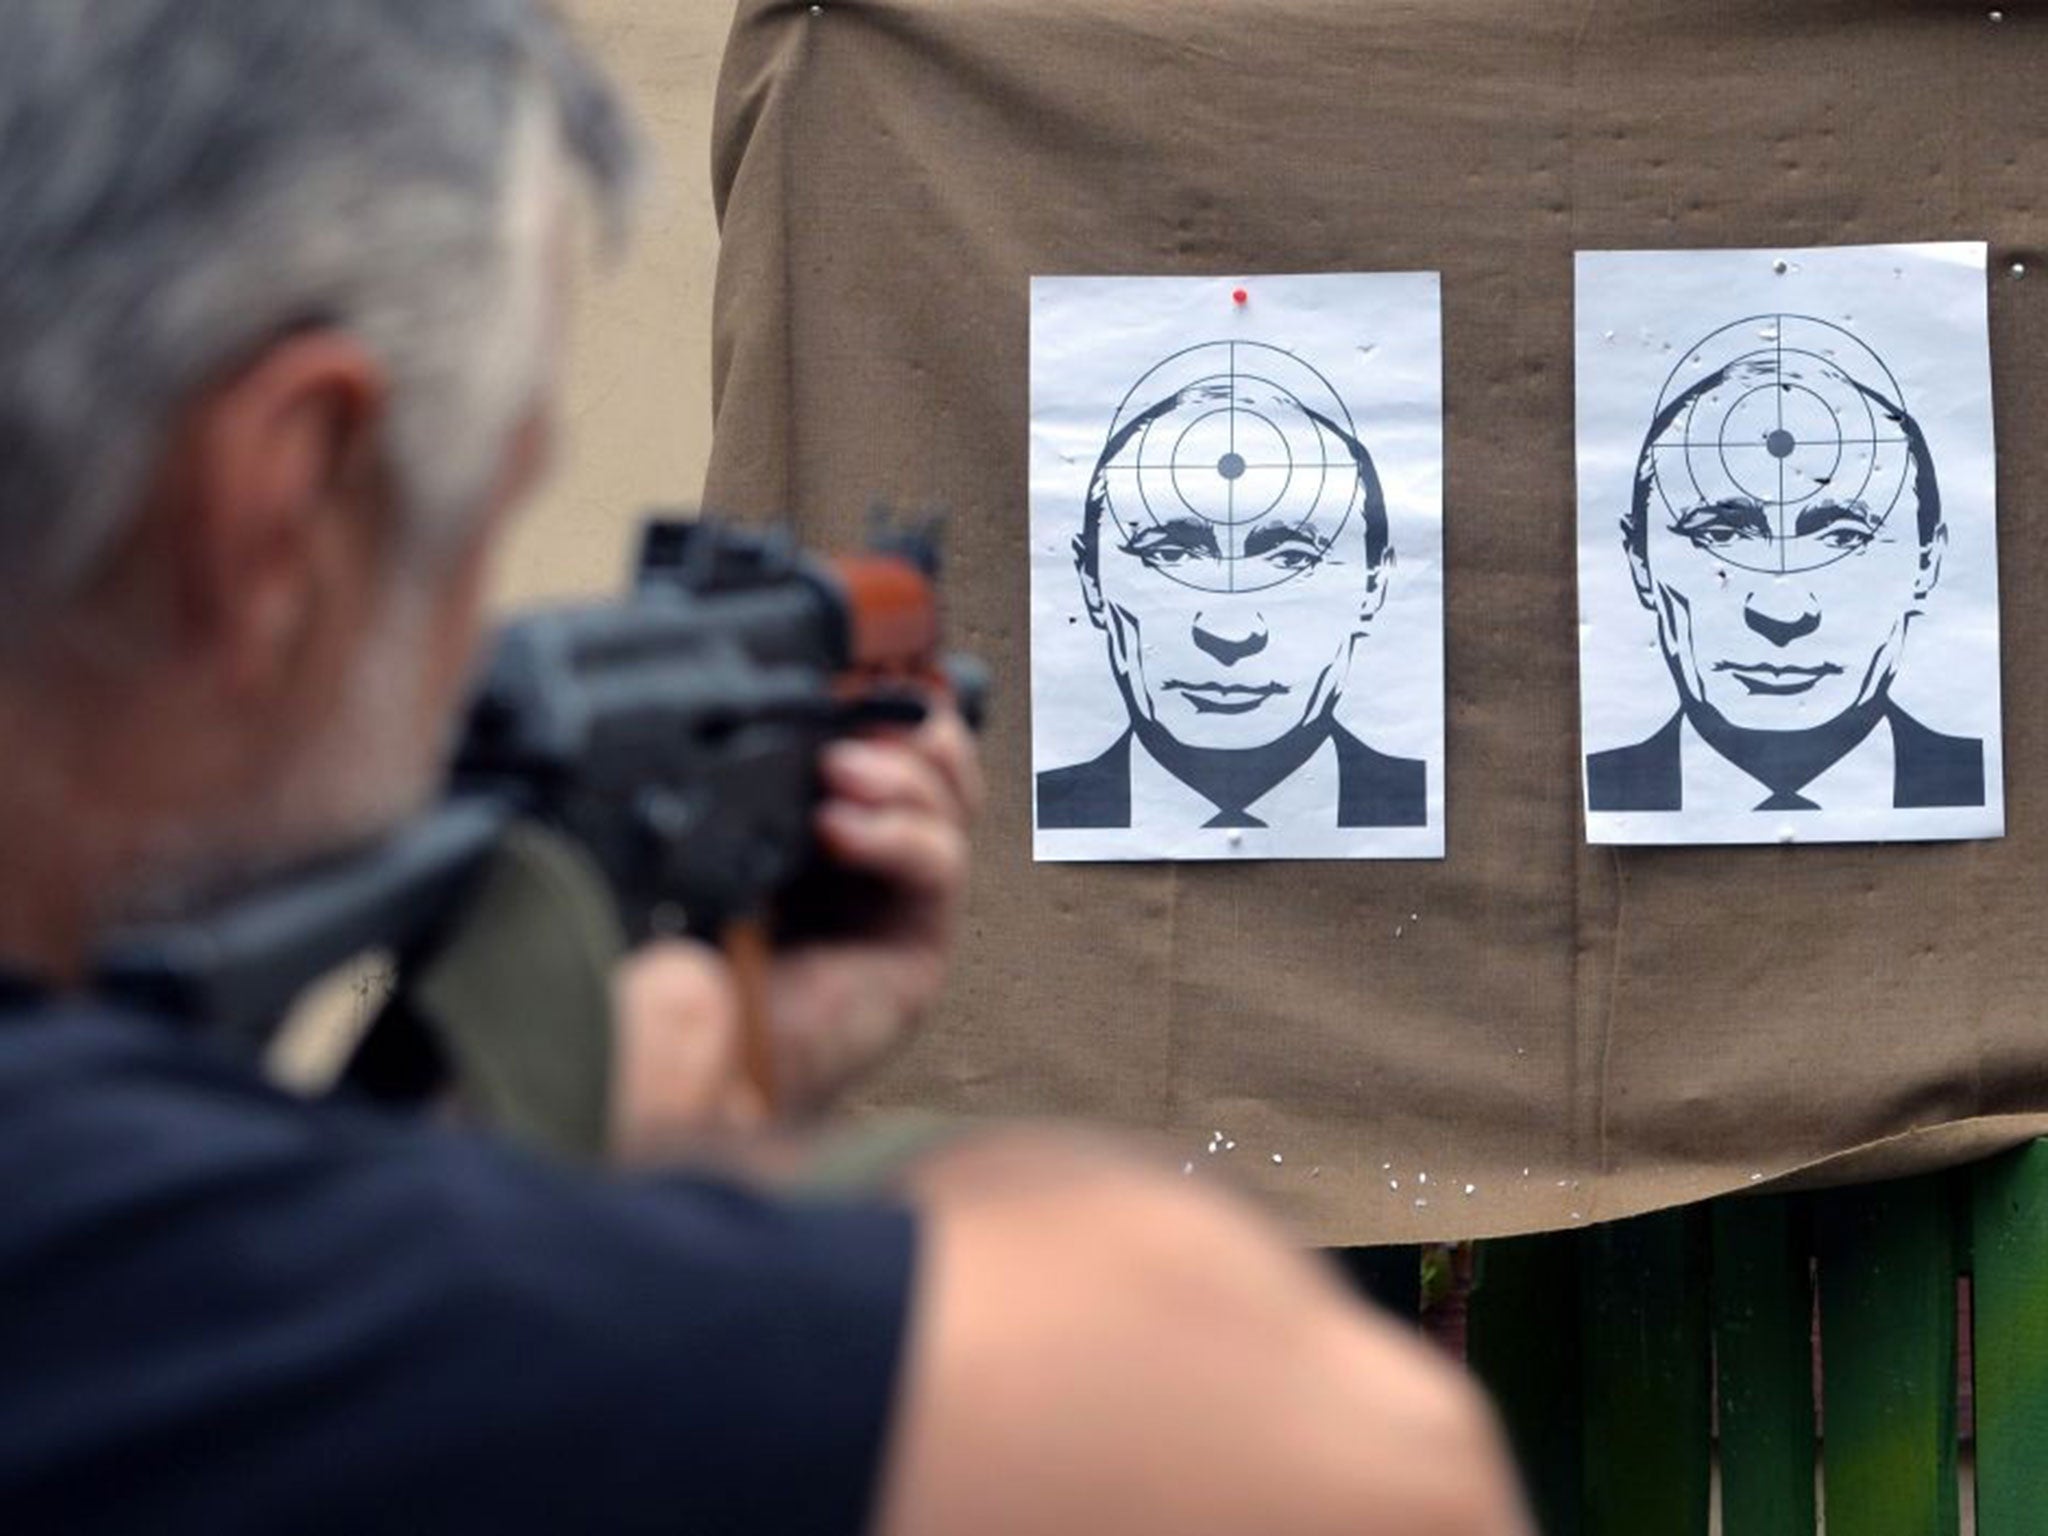 A man shoots at targets depicting a portrait of Russian President Vladimir Putin, in a shooting range in the center of the western Ukrainian city of Lviv